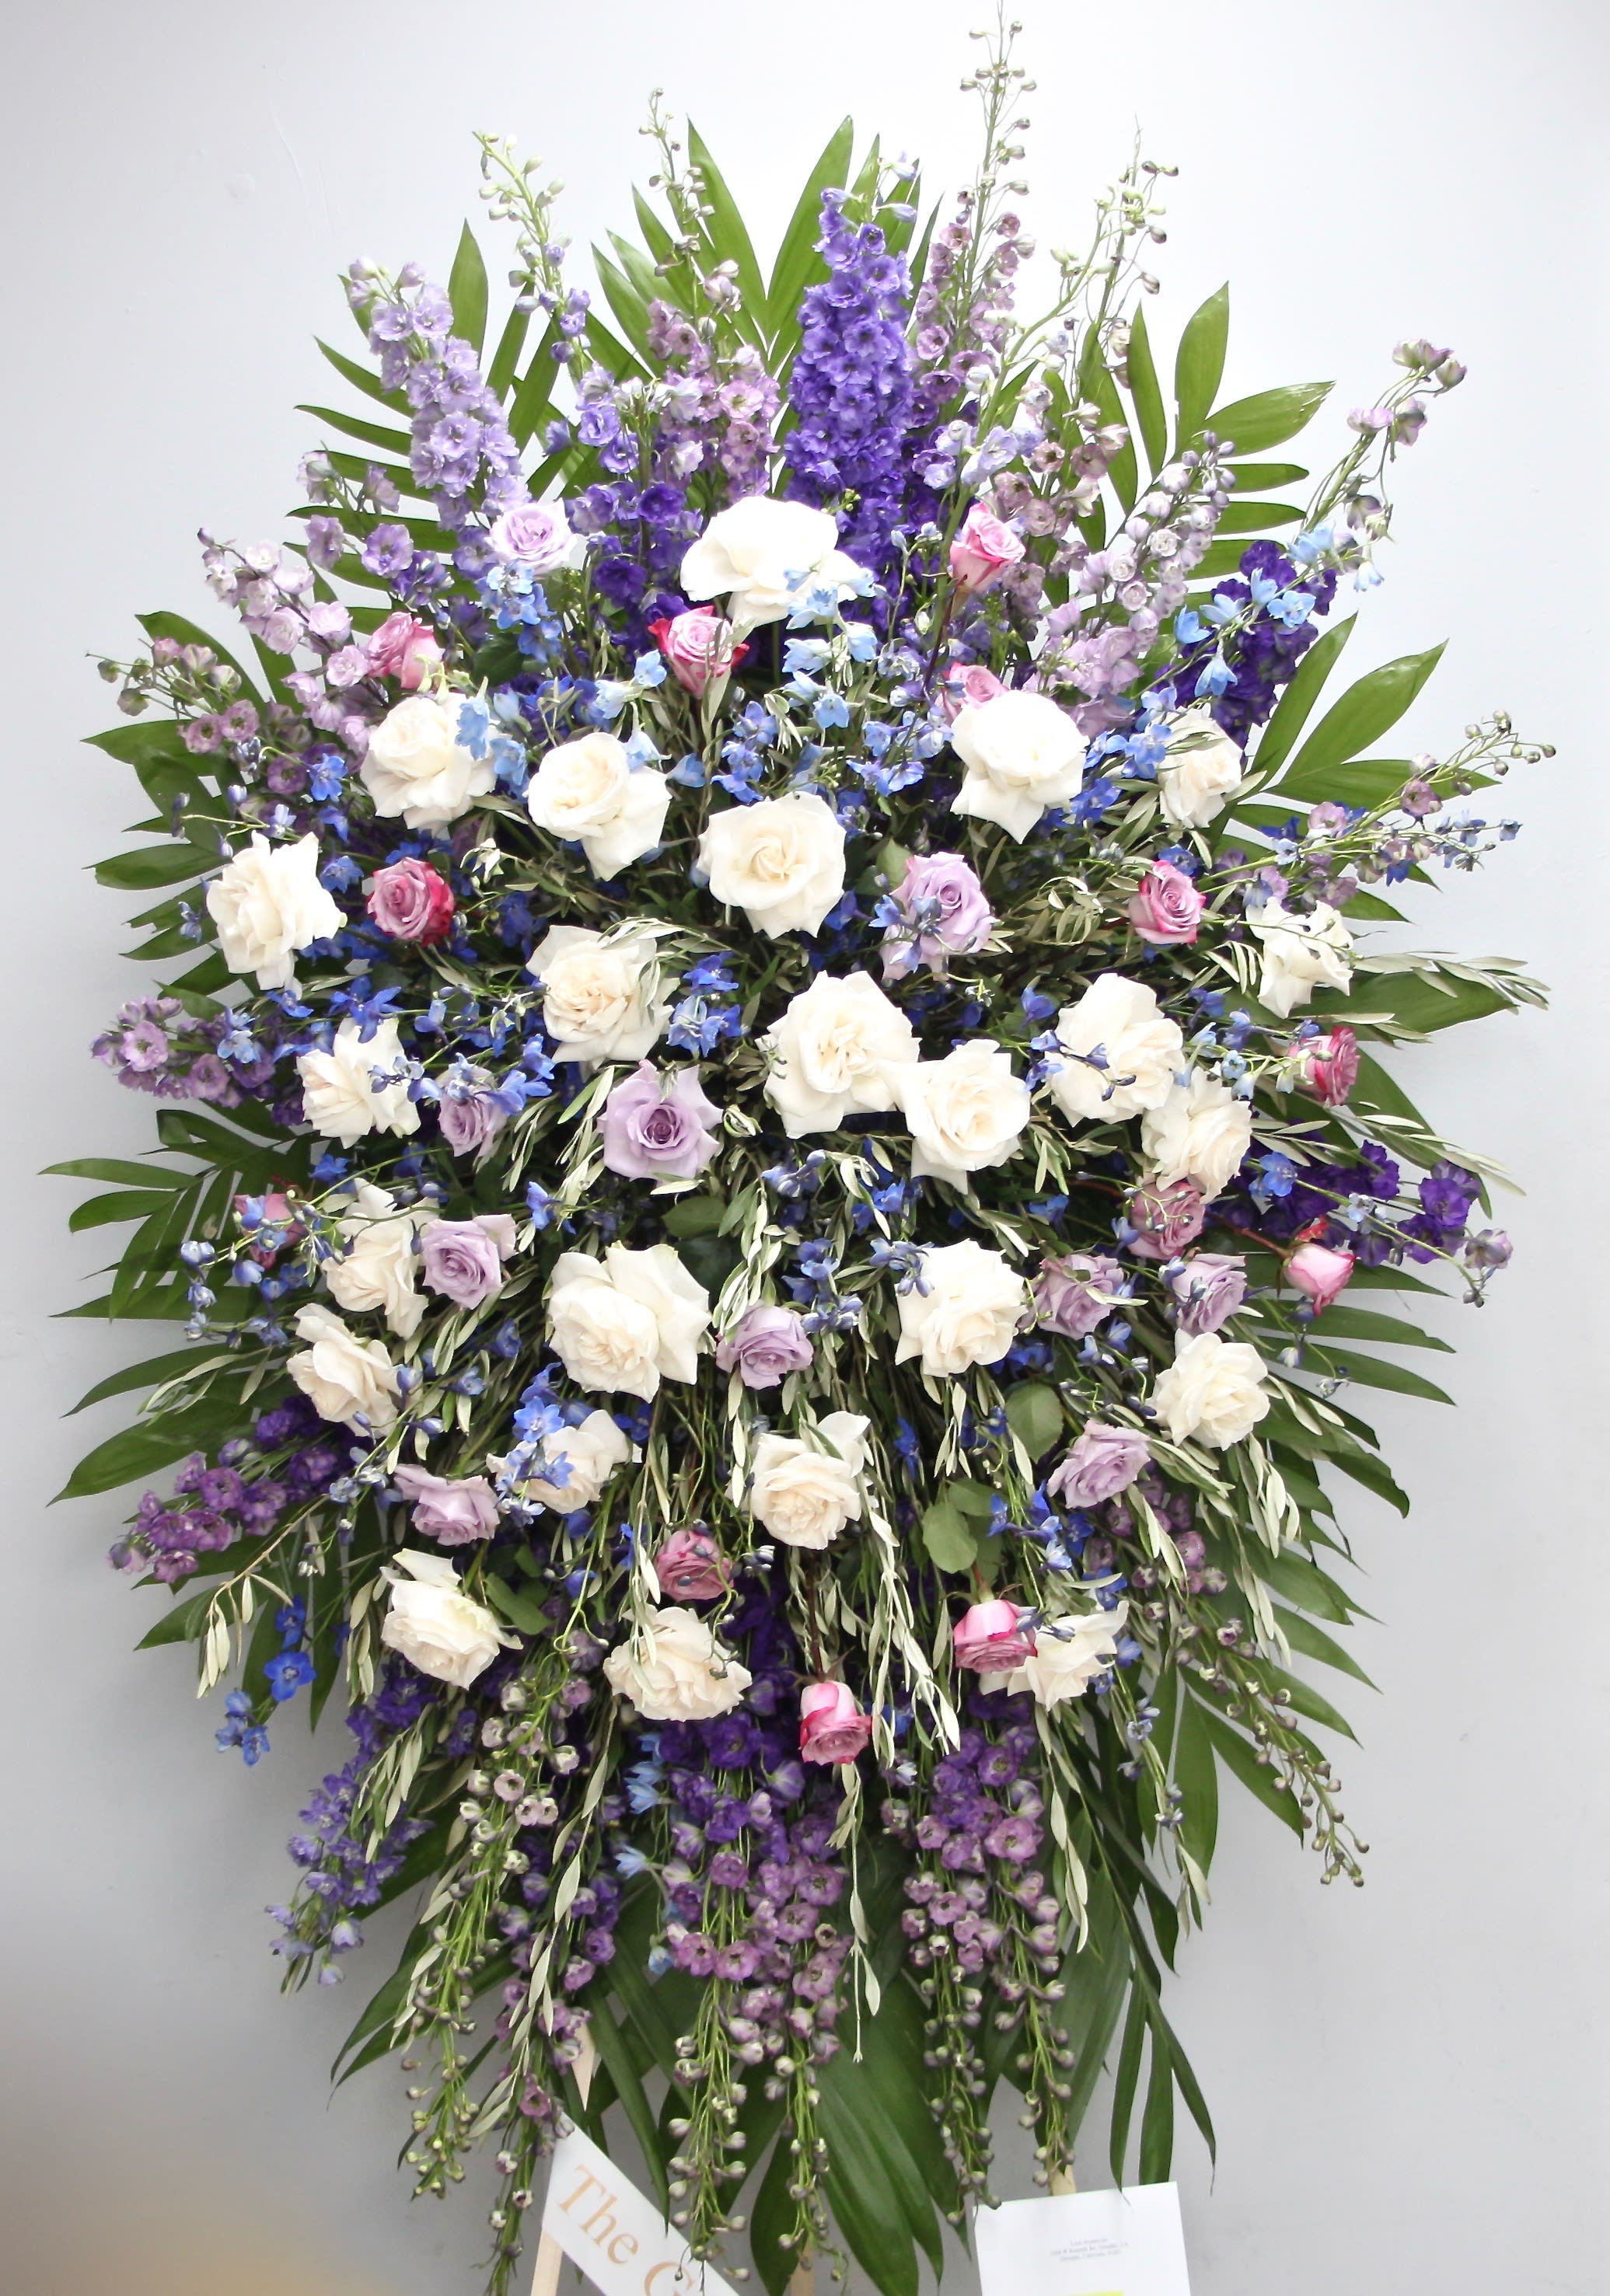 Lavender Spray  - This sympathy spray includes vibrant colors of lavender and violet. It also includes roses in white and pink and seasonal greens.   We include easel, printed banner and delivery (some fees may apply).  Standard size is 30'' wide, deluxe is 36'', and premium is 42''.